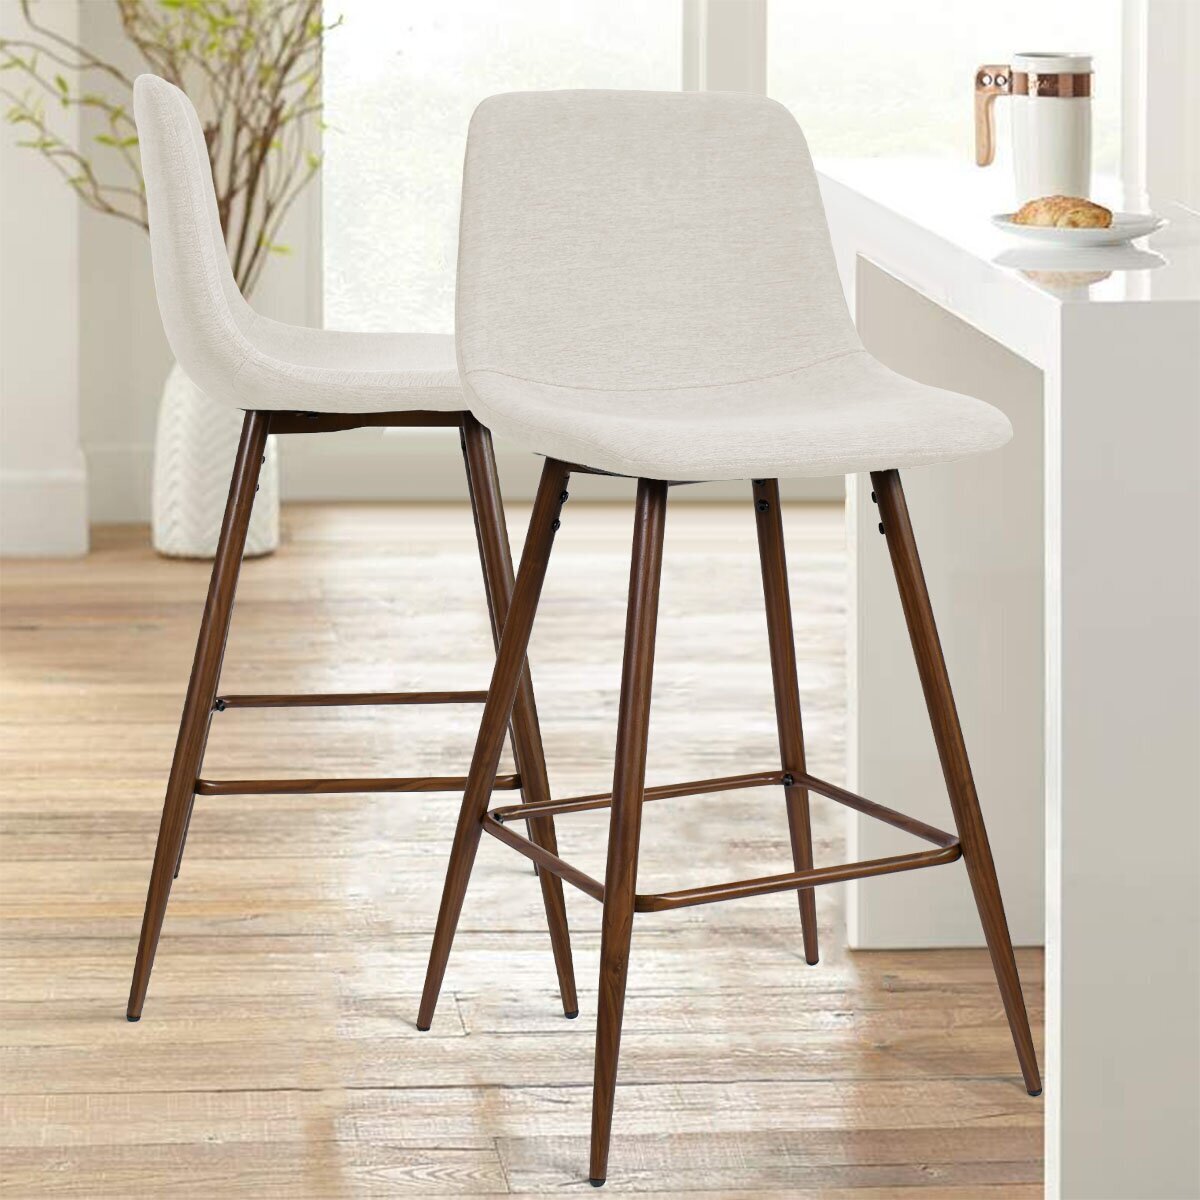 Cream upholstered bar stools in industrial style